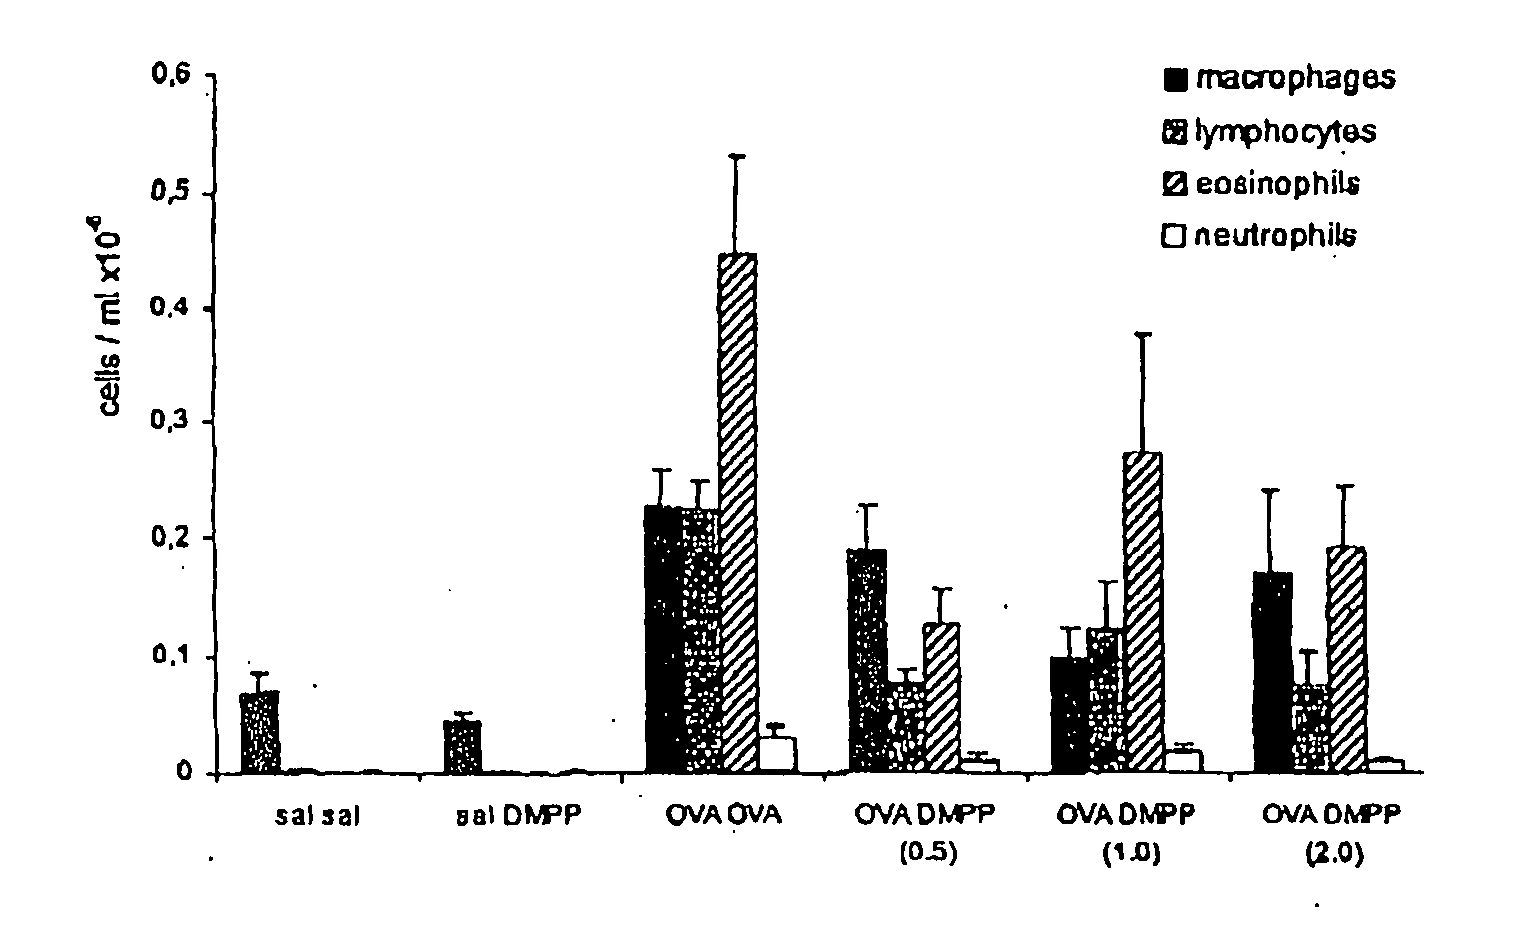 Nicotinic receptor agonists and analogues and derivatives thereof for the treatment of inflammatory diseases